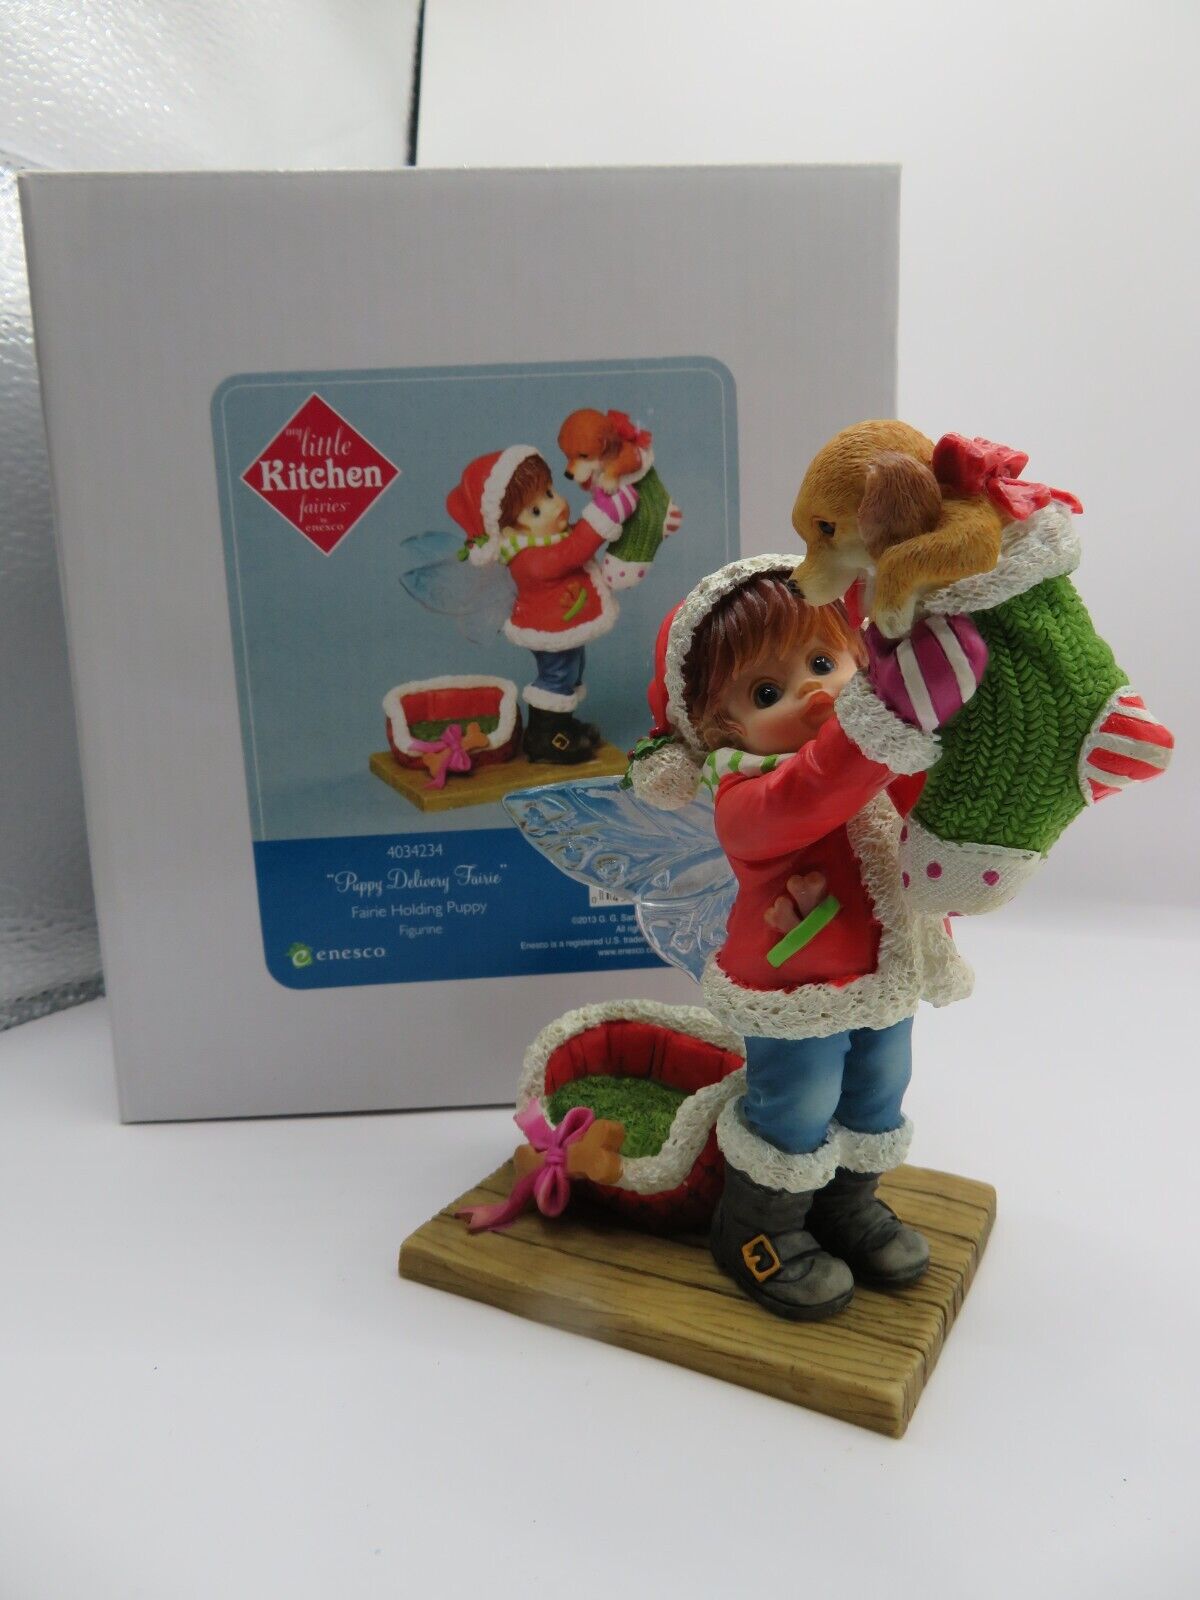 Enesco My Little Kitchen Fairies Puppy Delivery Fairie 4034234 Rare New-free shi